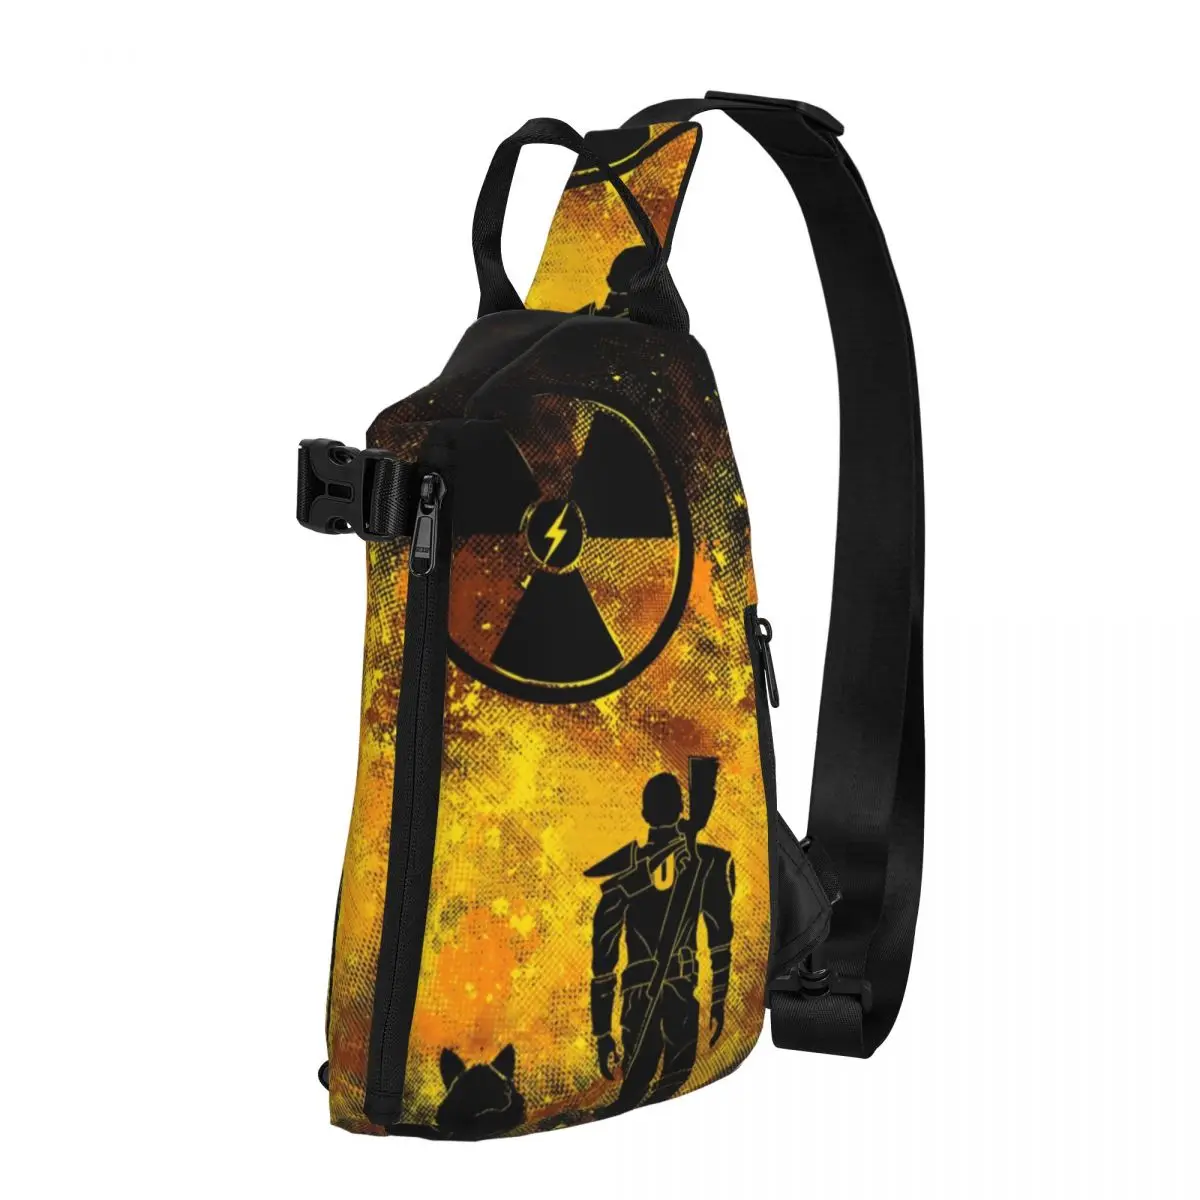 

Wasteland Art Fallout 4 Chest Bags dogmeat nuclear video games Trekking Shoulder Bag Funny Small Bag Business Running Sling Bags